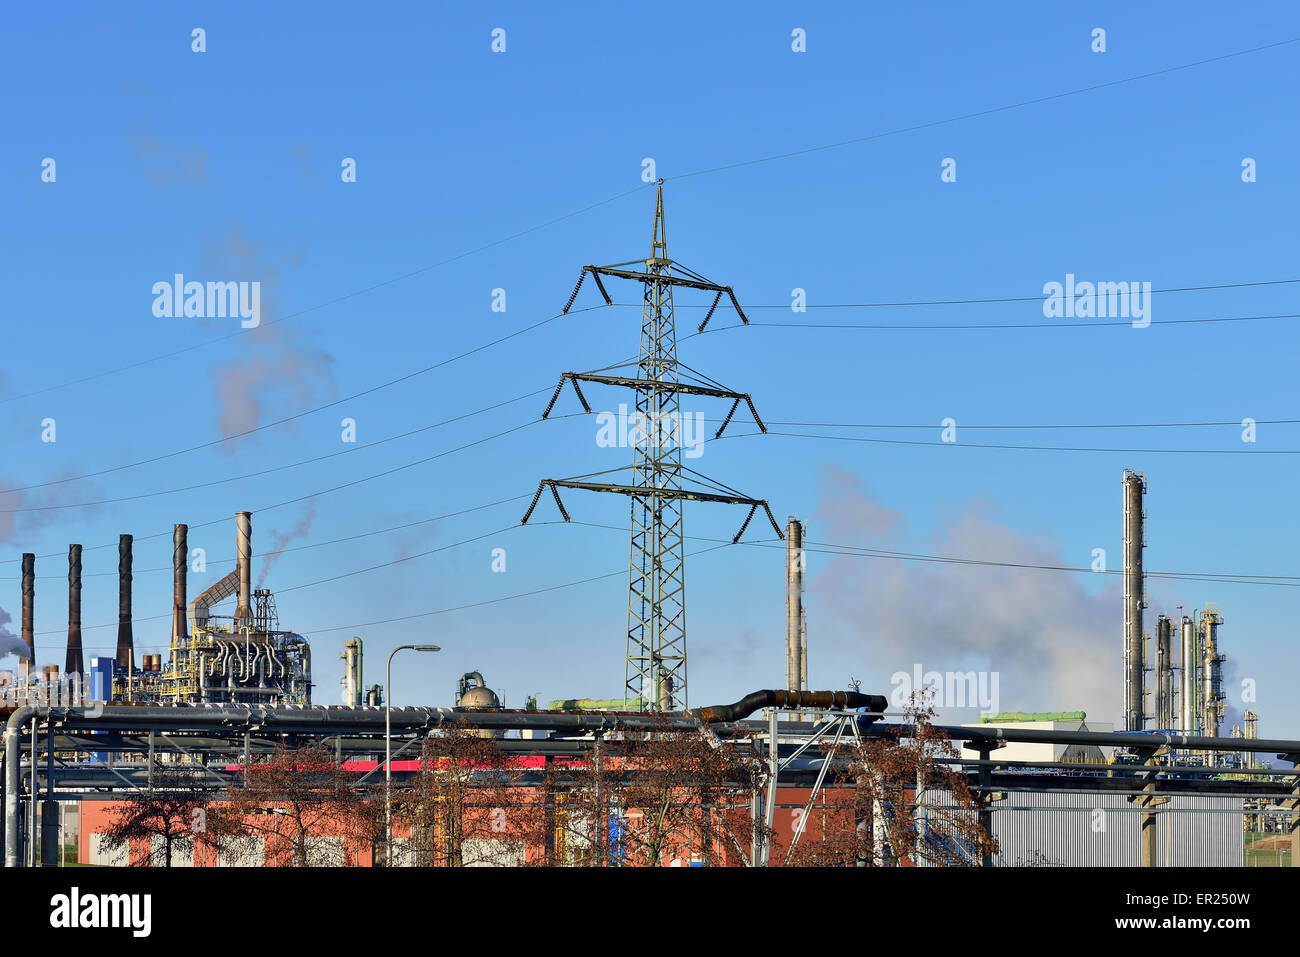 Panorama of industrial zone with pipes and steam on blue sky and electric poles Stock Photo